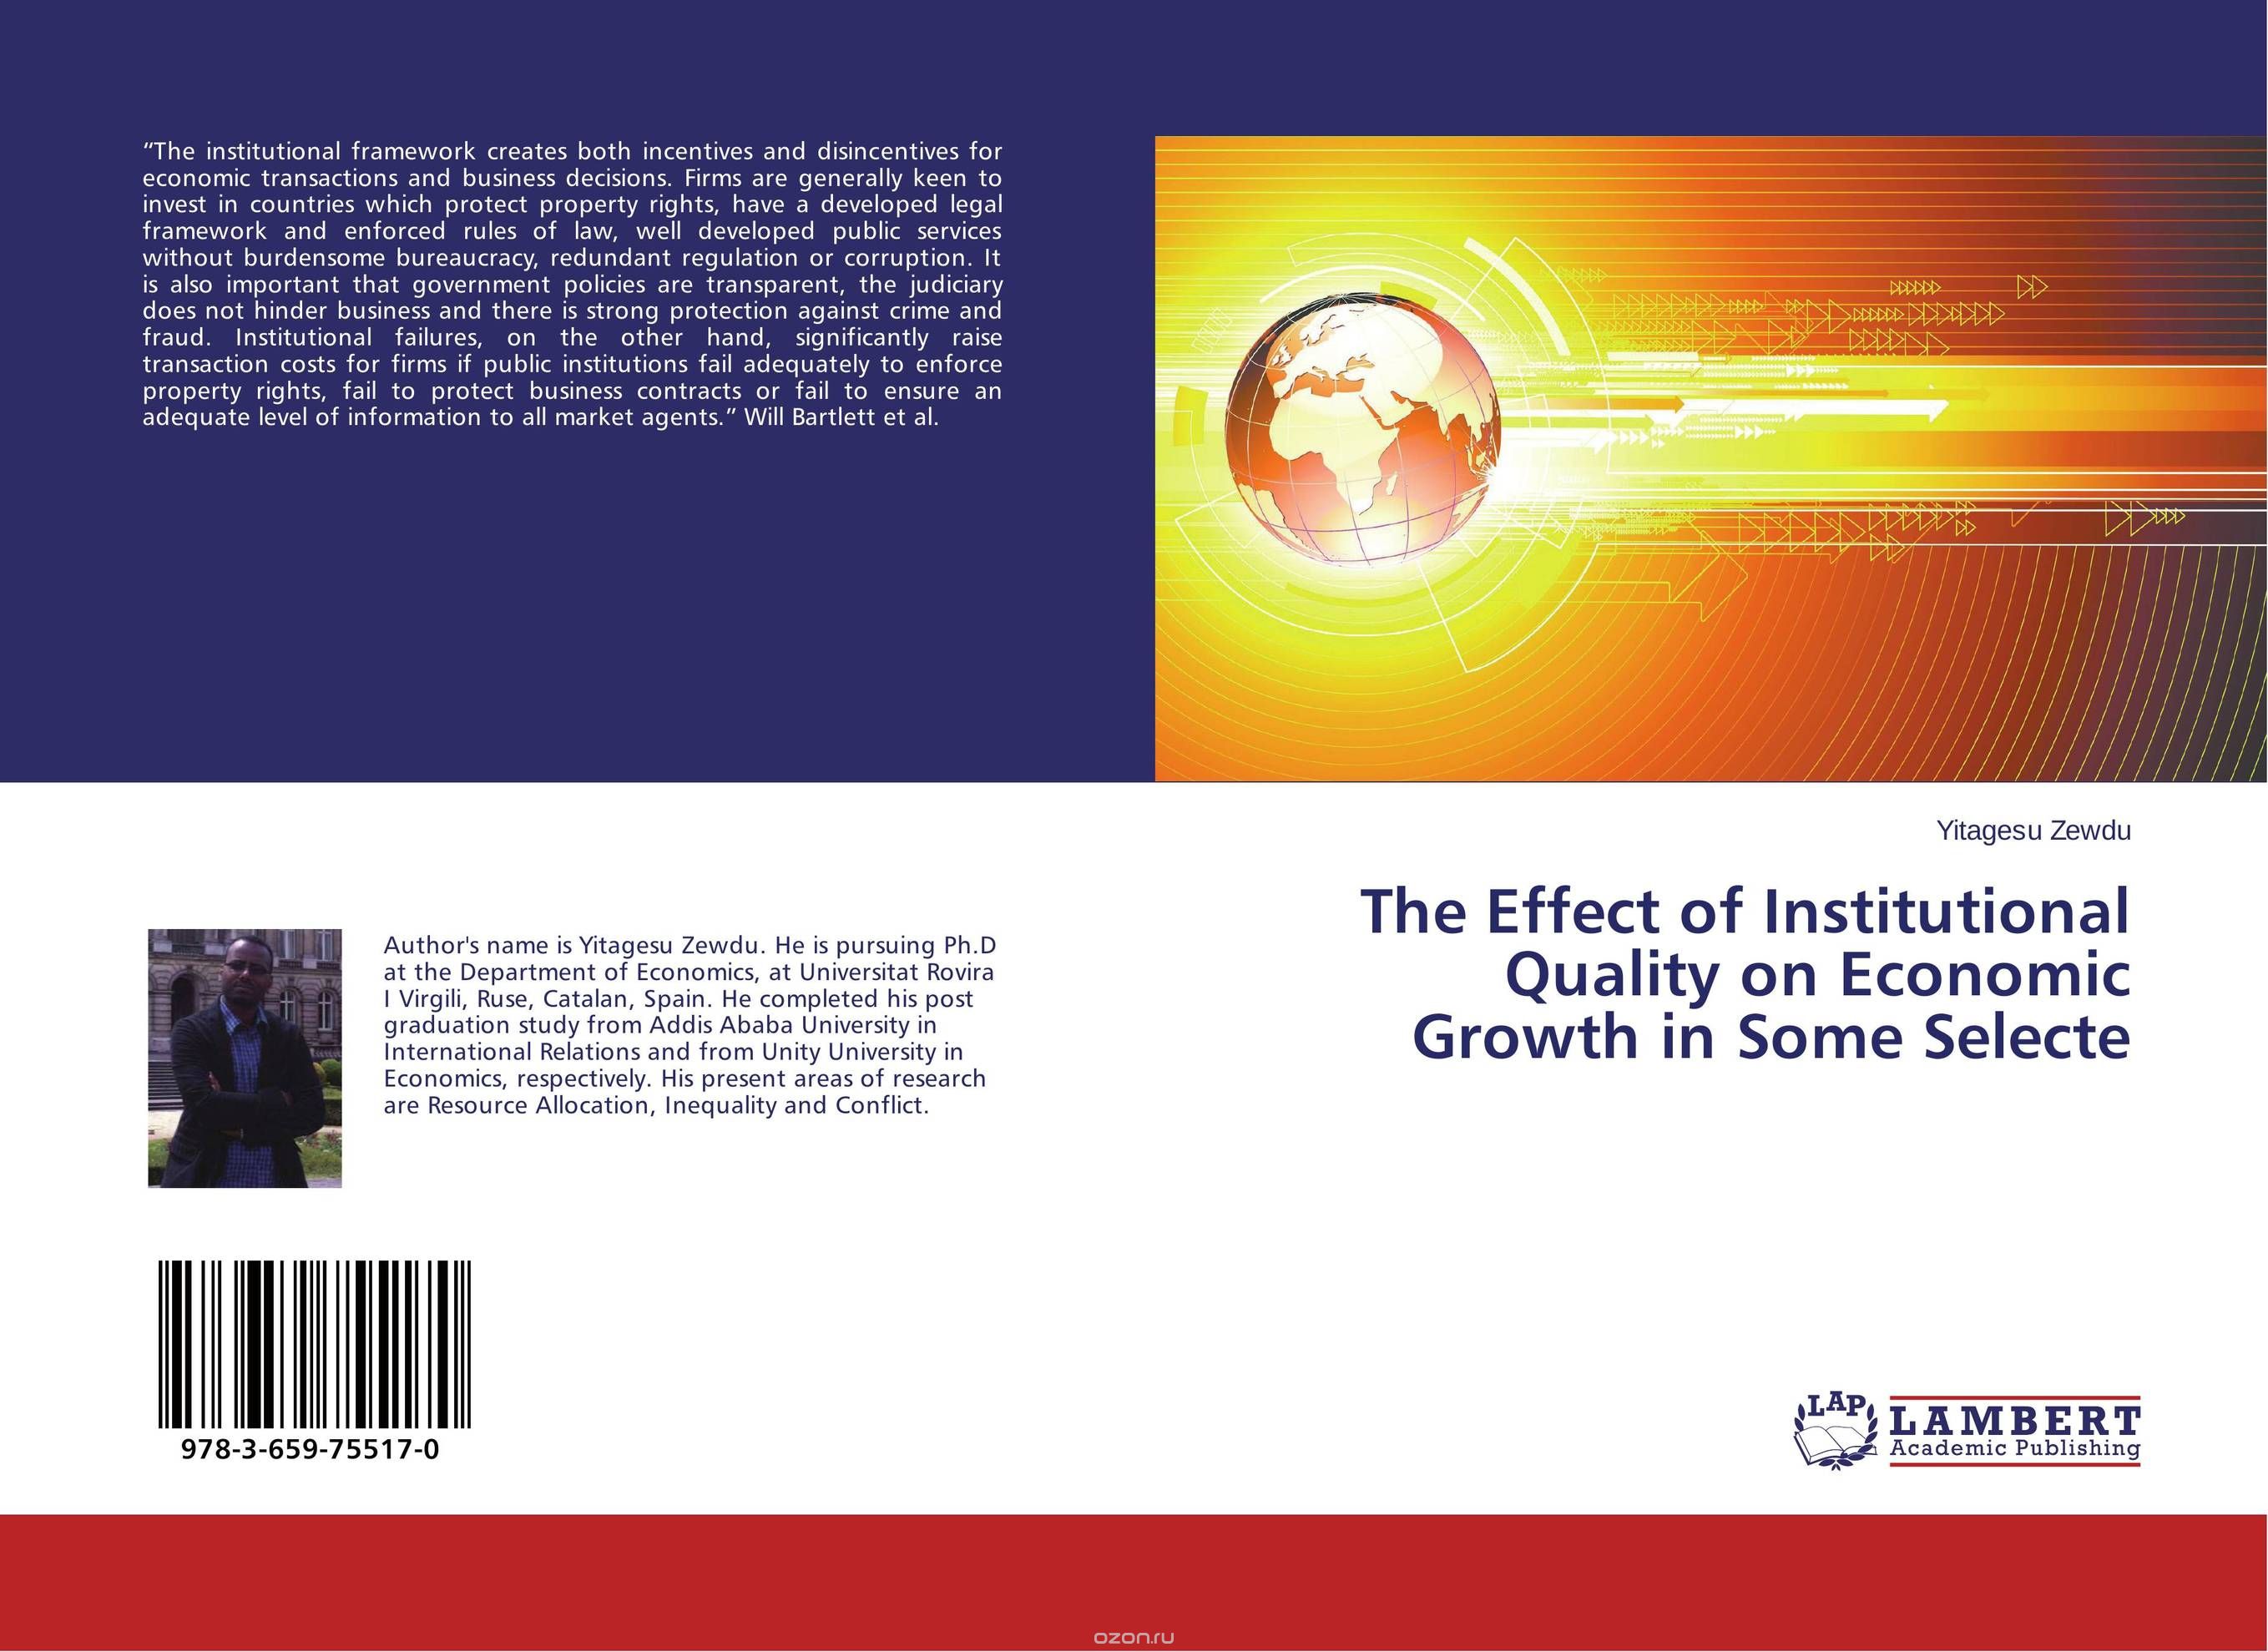 The Effect of Institutional Quality on Economic Growth in Some Selecte